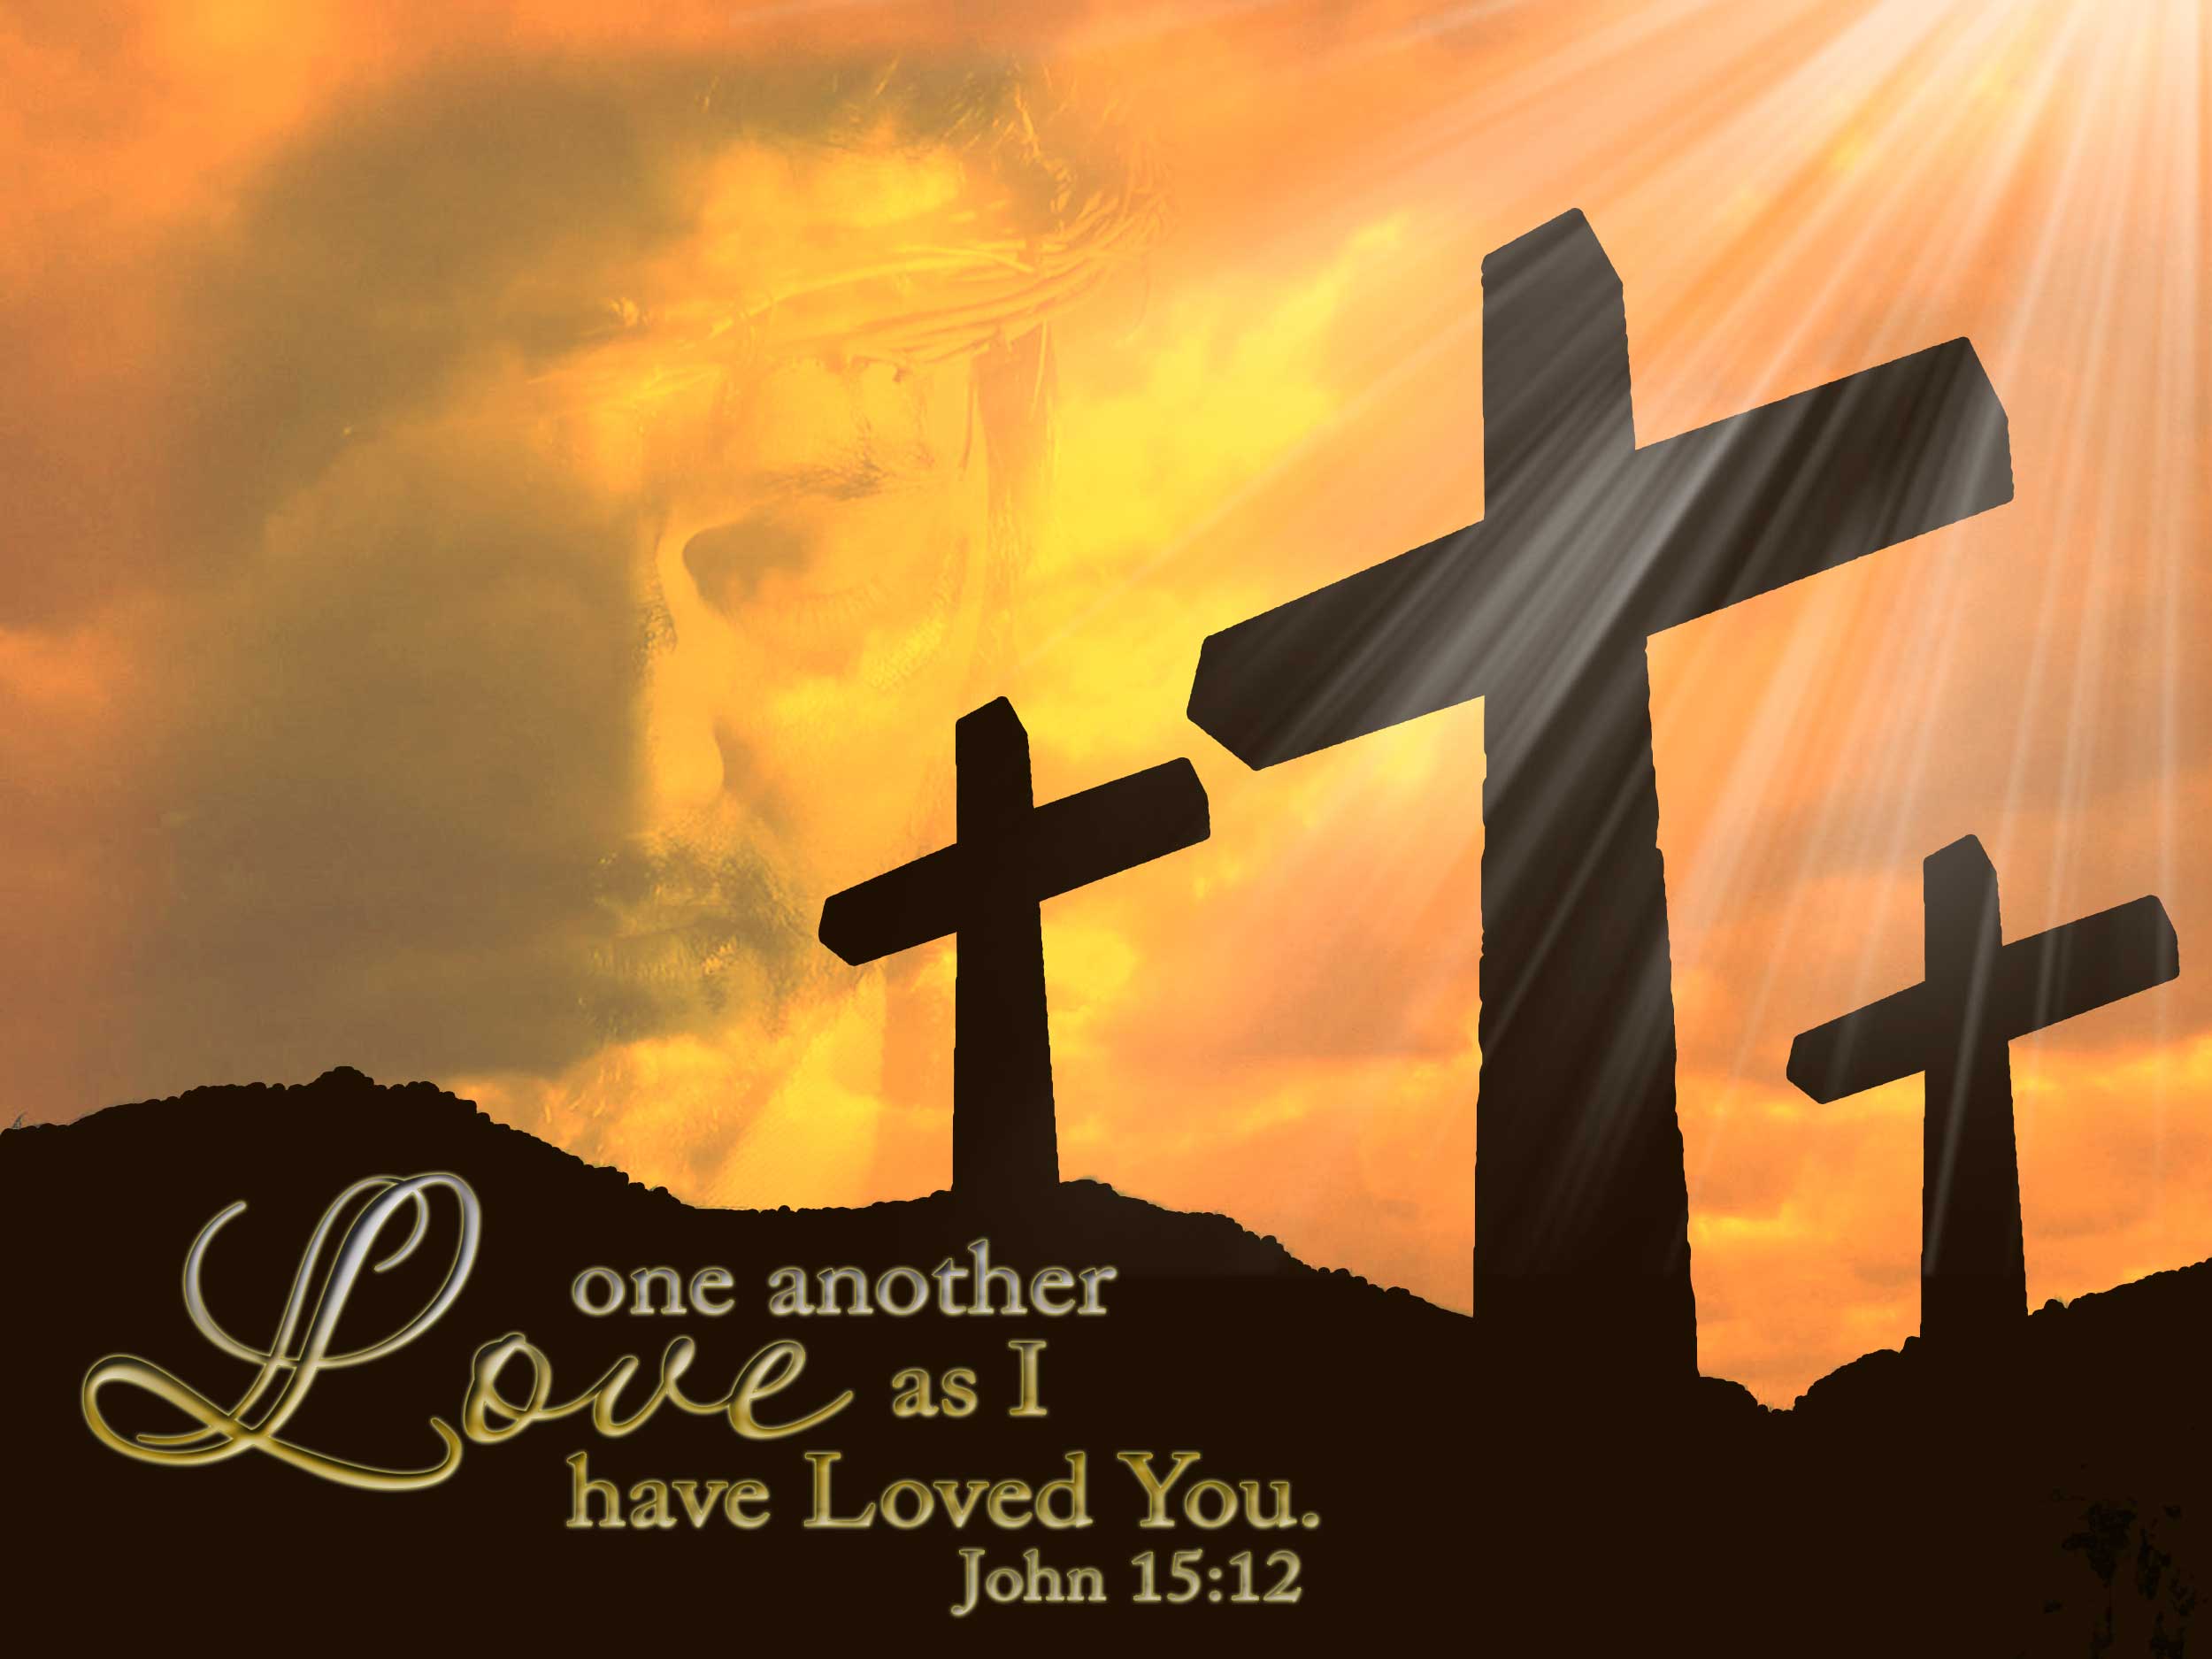  12   Love one another Wallpaper   Christian Wallpapers and Backgrounds 2500x1875